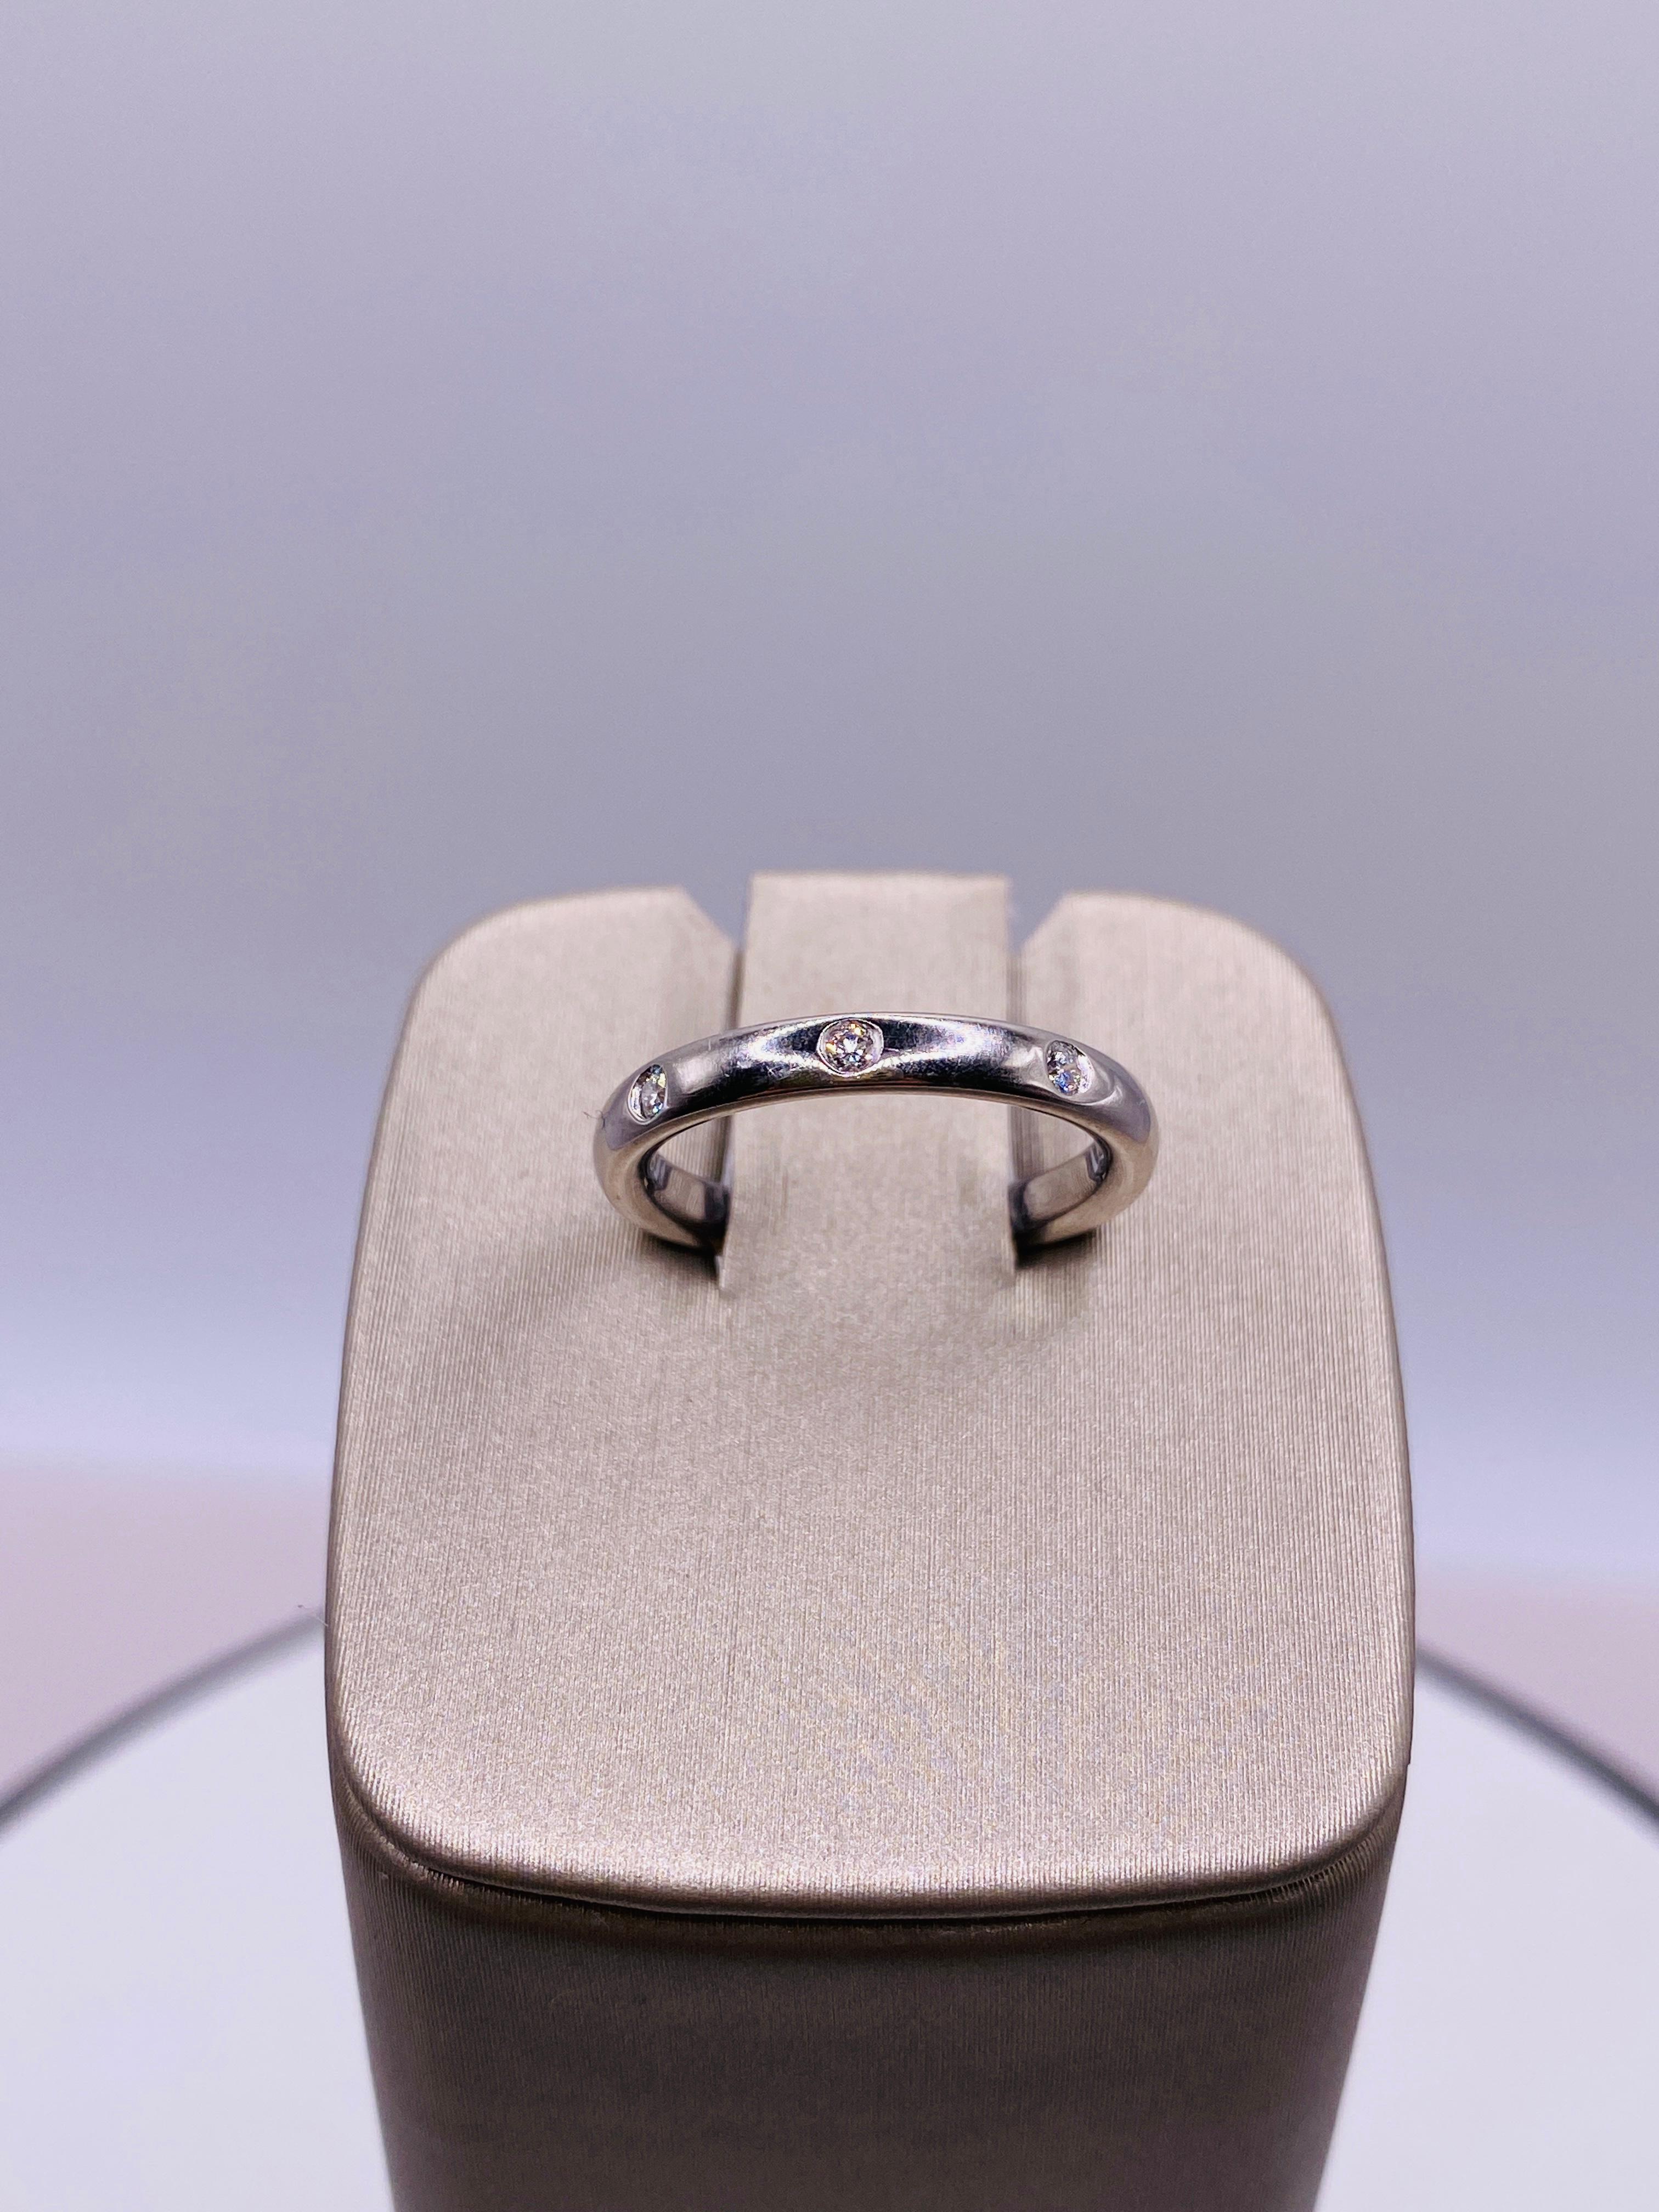 Van Cleef & Arpels Tendrement Etoiles 0.06 carat total weight platinum band ring. Size 47/US 4